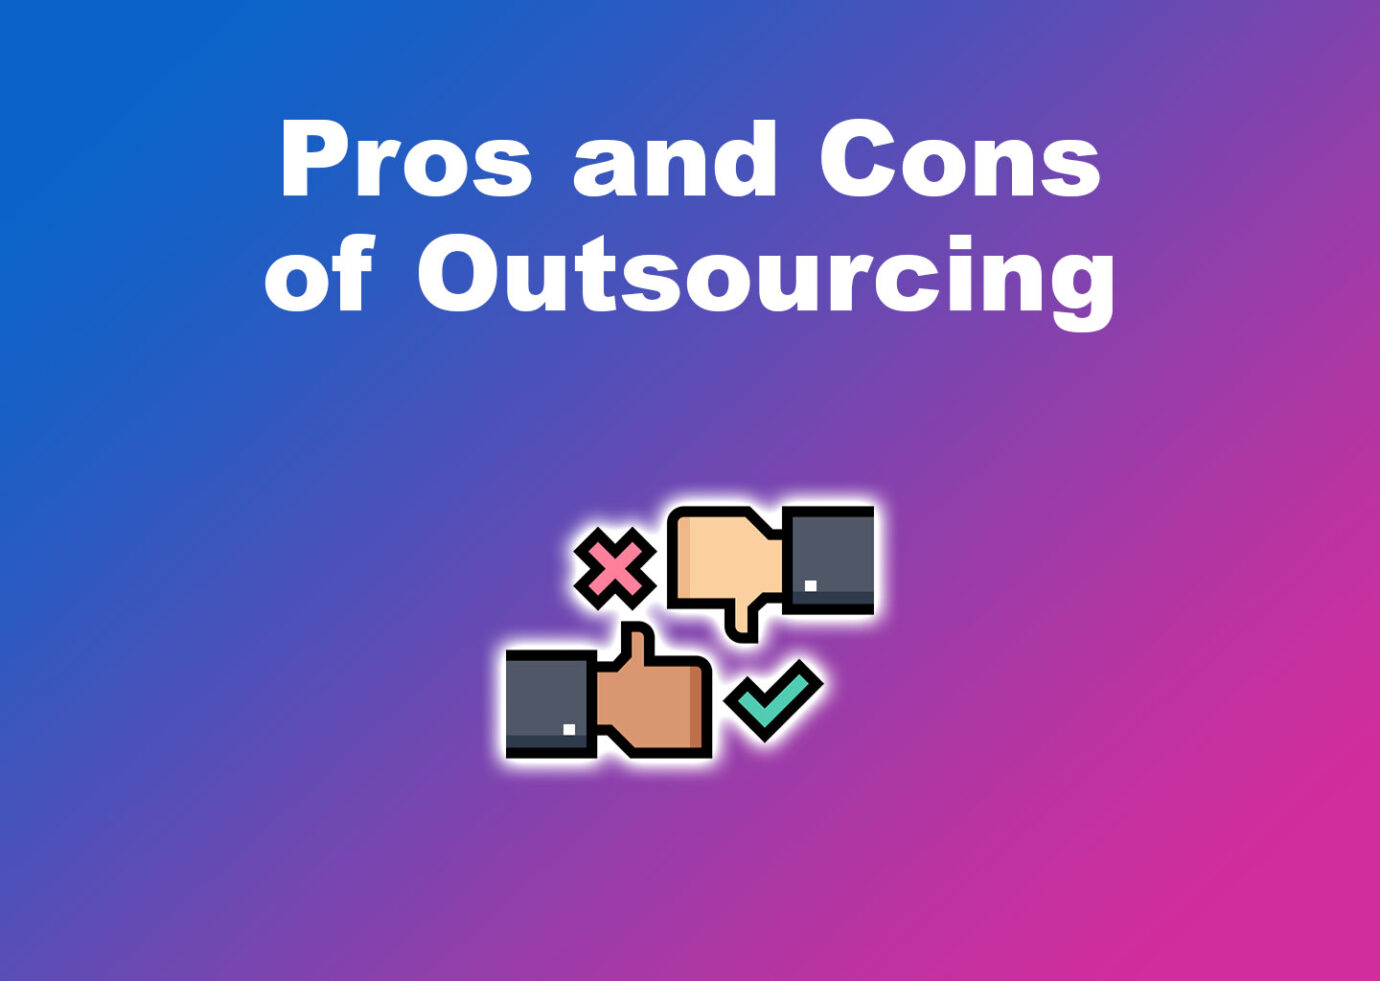 Pros and Cons of Outsourcing